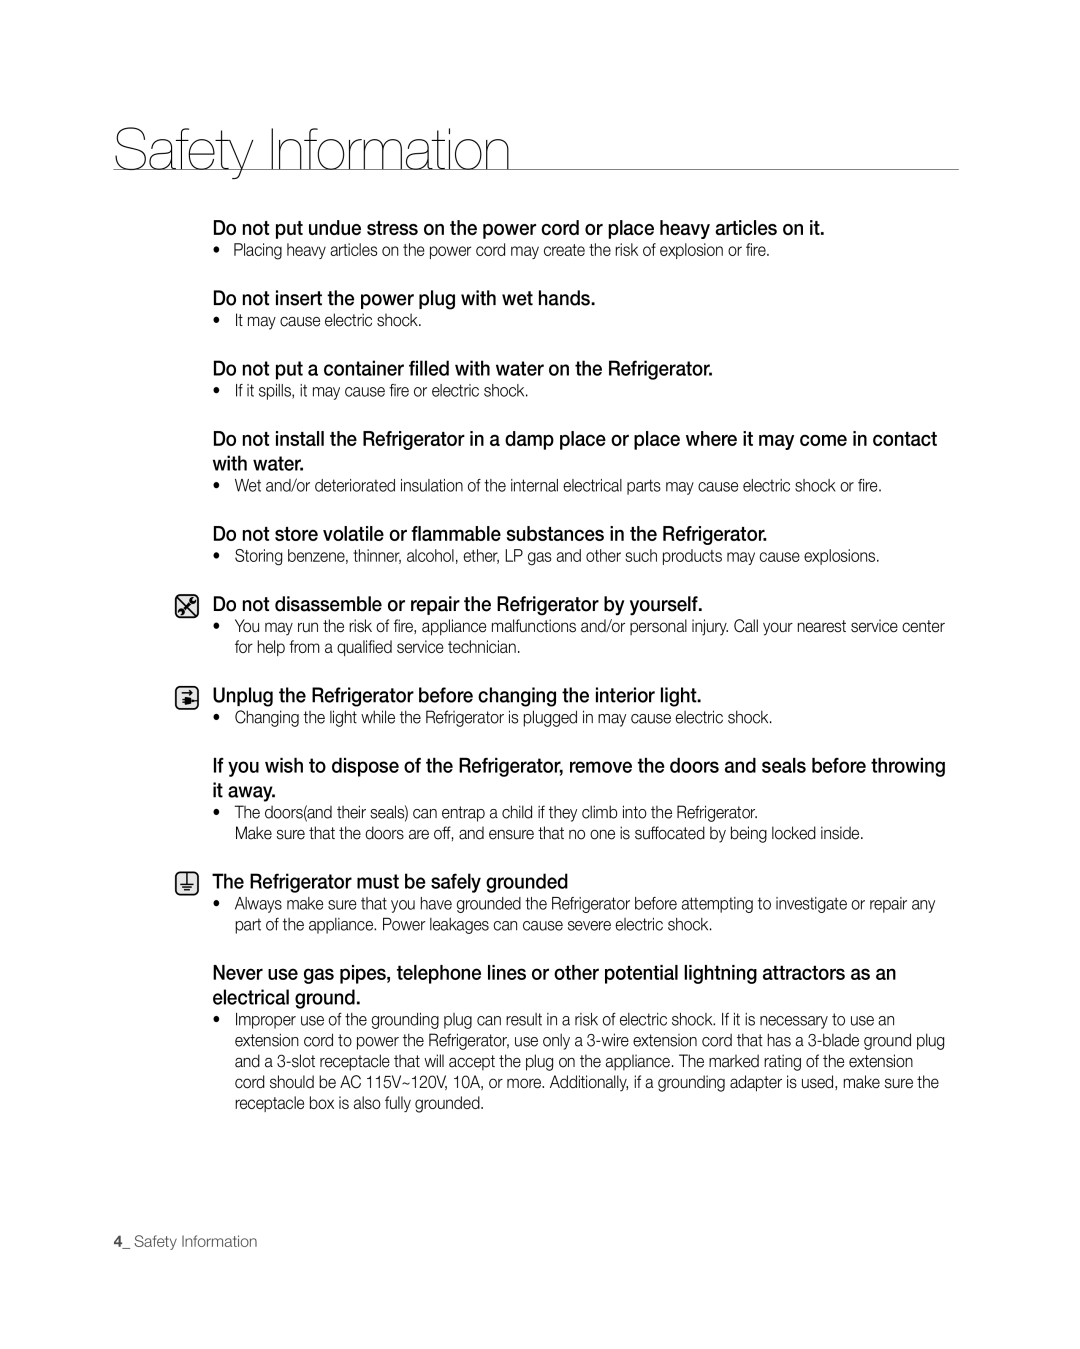 Samsung RFG297AAWP user manual Safety Information, Do not insert the power plug with wet hands 